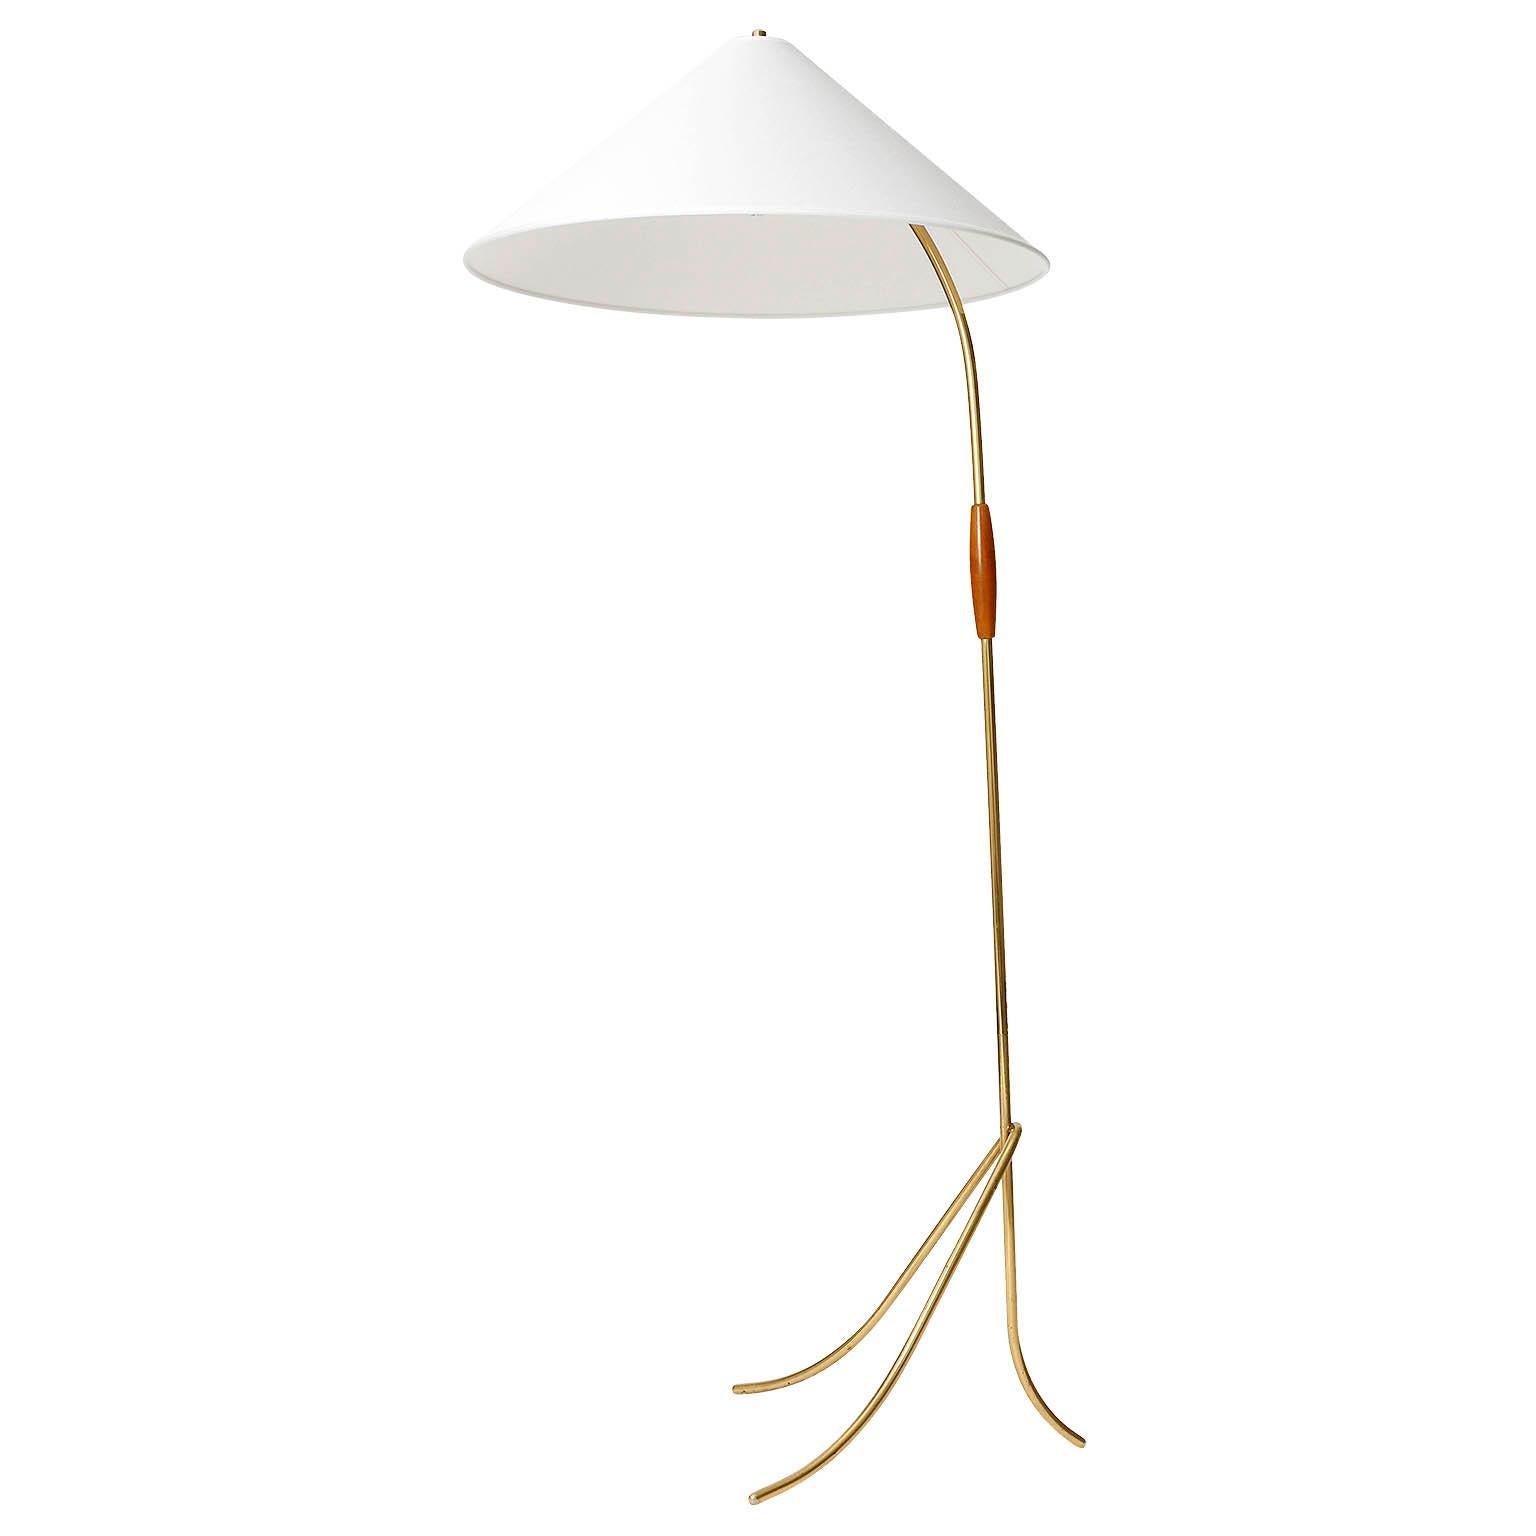 A gorgeous floor light by Rupert Nikoll, Austria, manufactured in midcentury, circa 1960 (late 1950s or early 1960s).
The light is very similar to the floor lamp model 'Hase' (engl. rabbit) designed by J.T. Kalmar.
A white textile lamp shade sits on